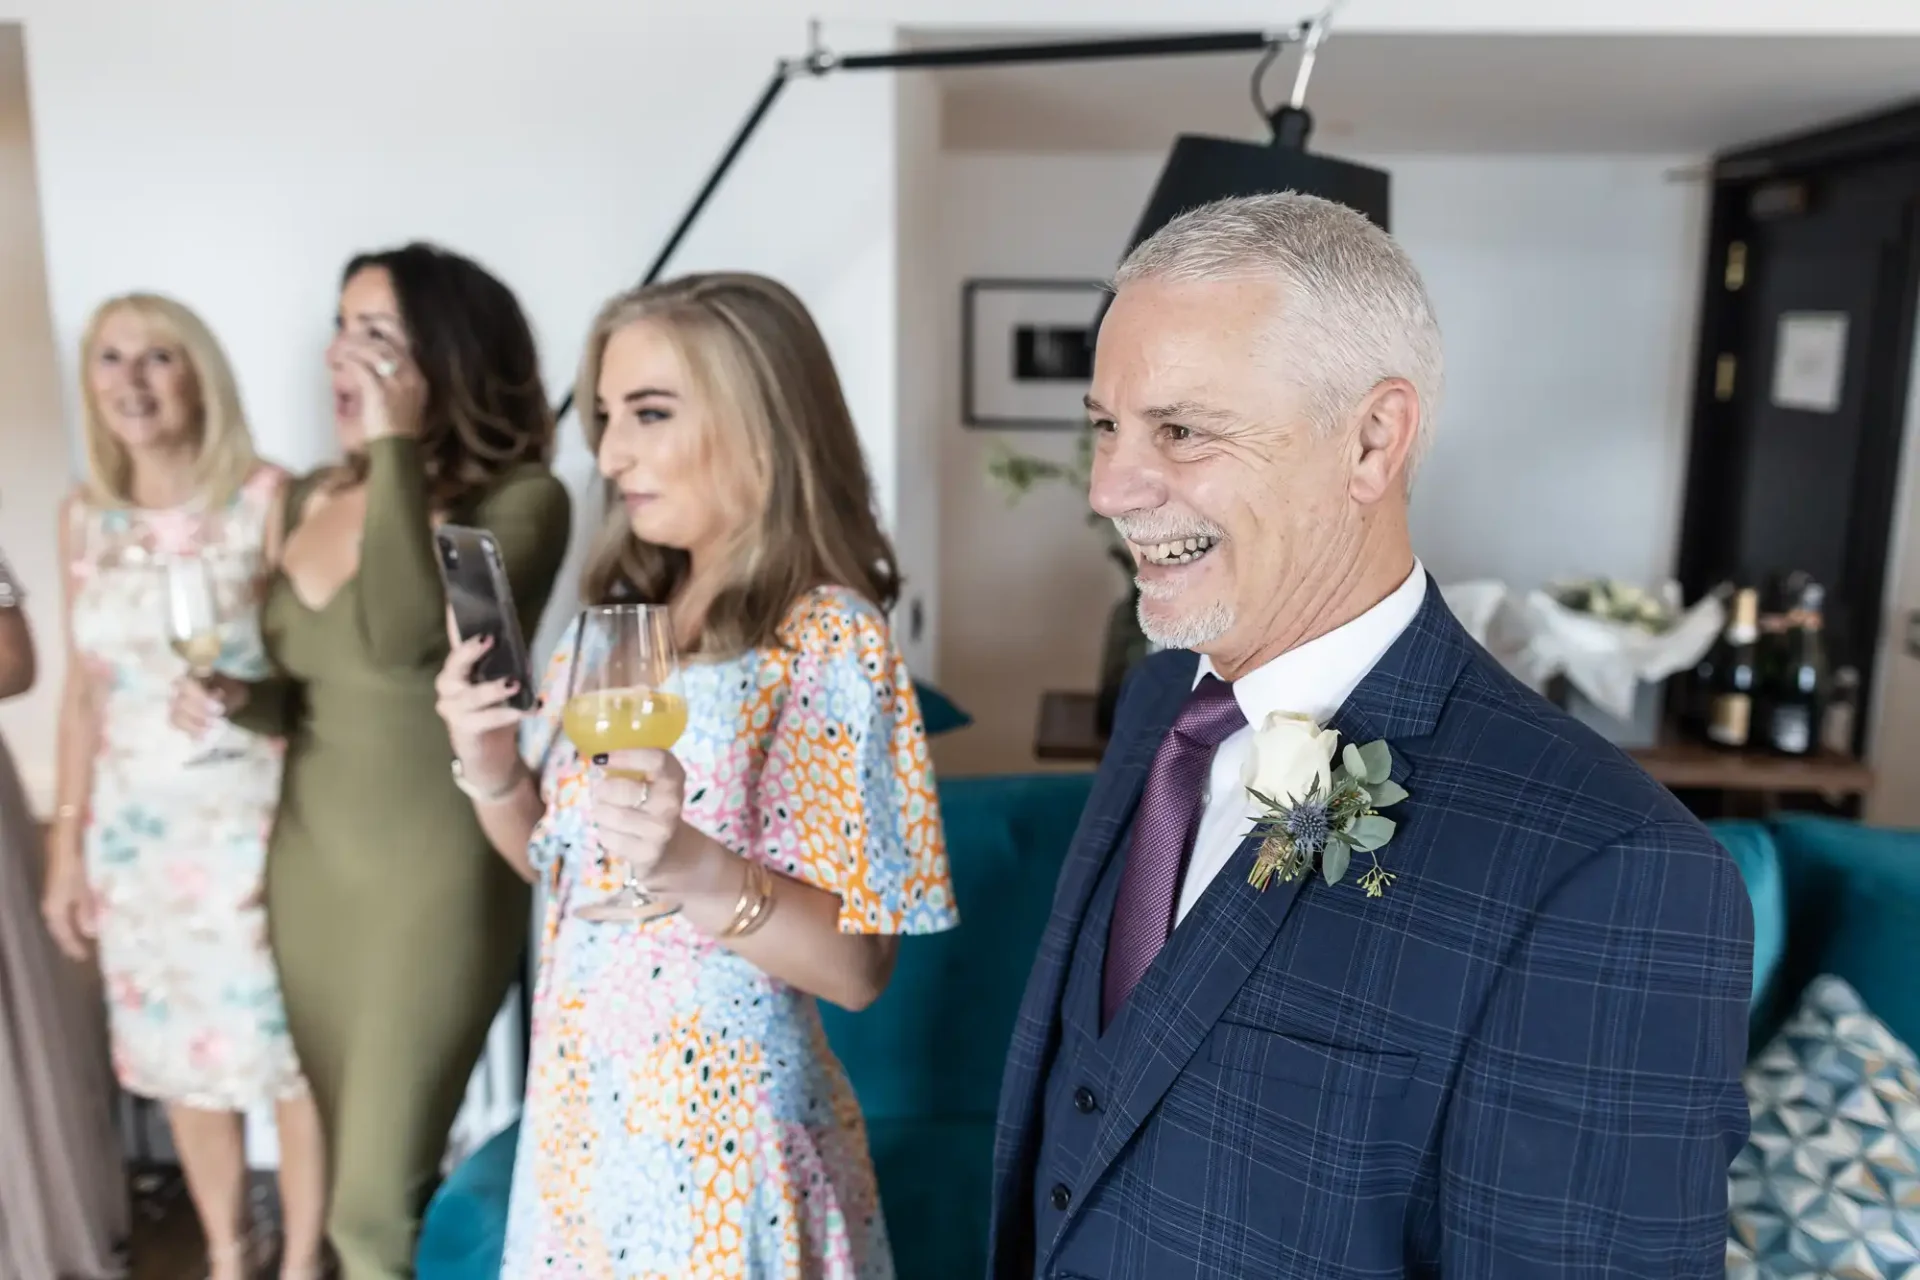 A smiling older man with a boutonniere stands in a room with three women holding drinks, who are engaged in conversation and laughter.